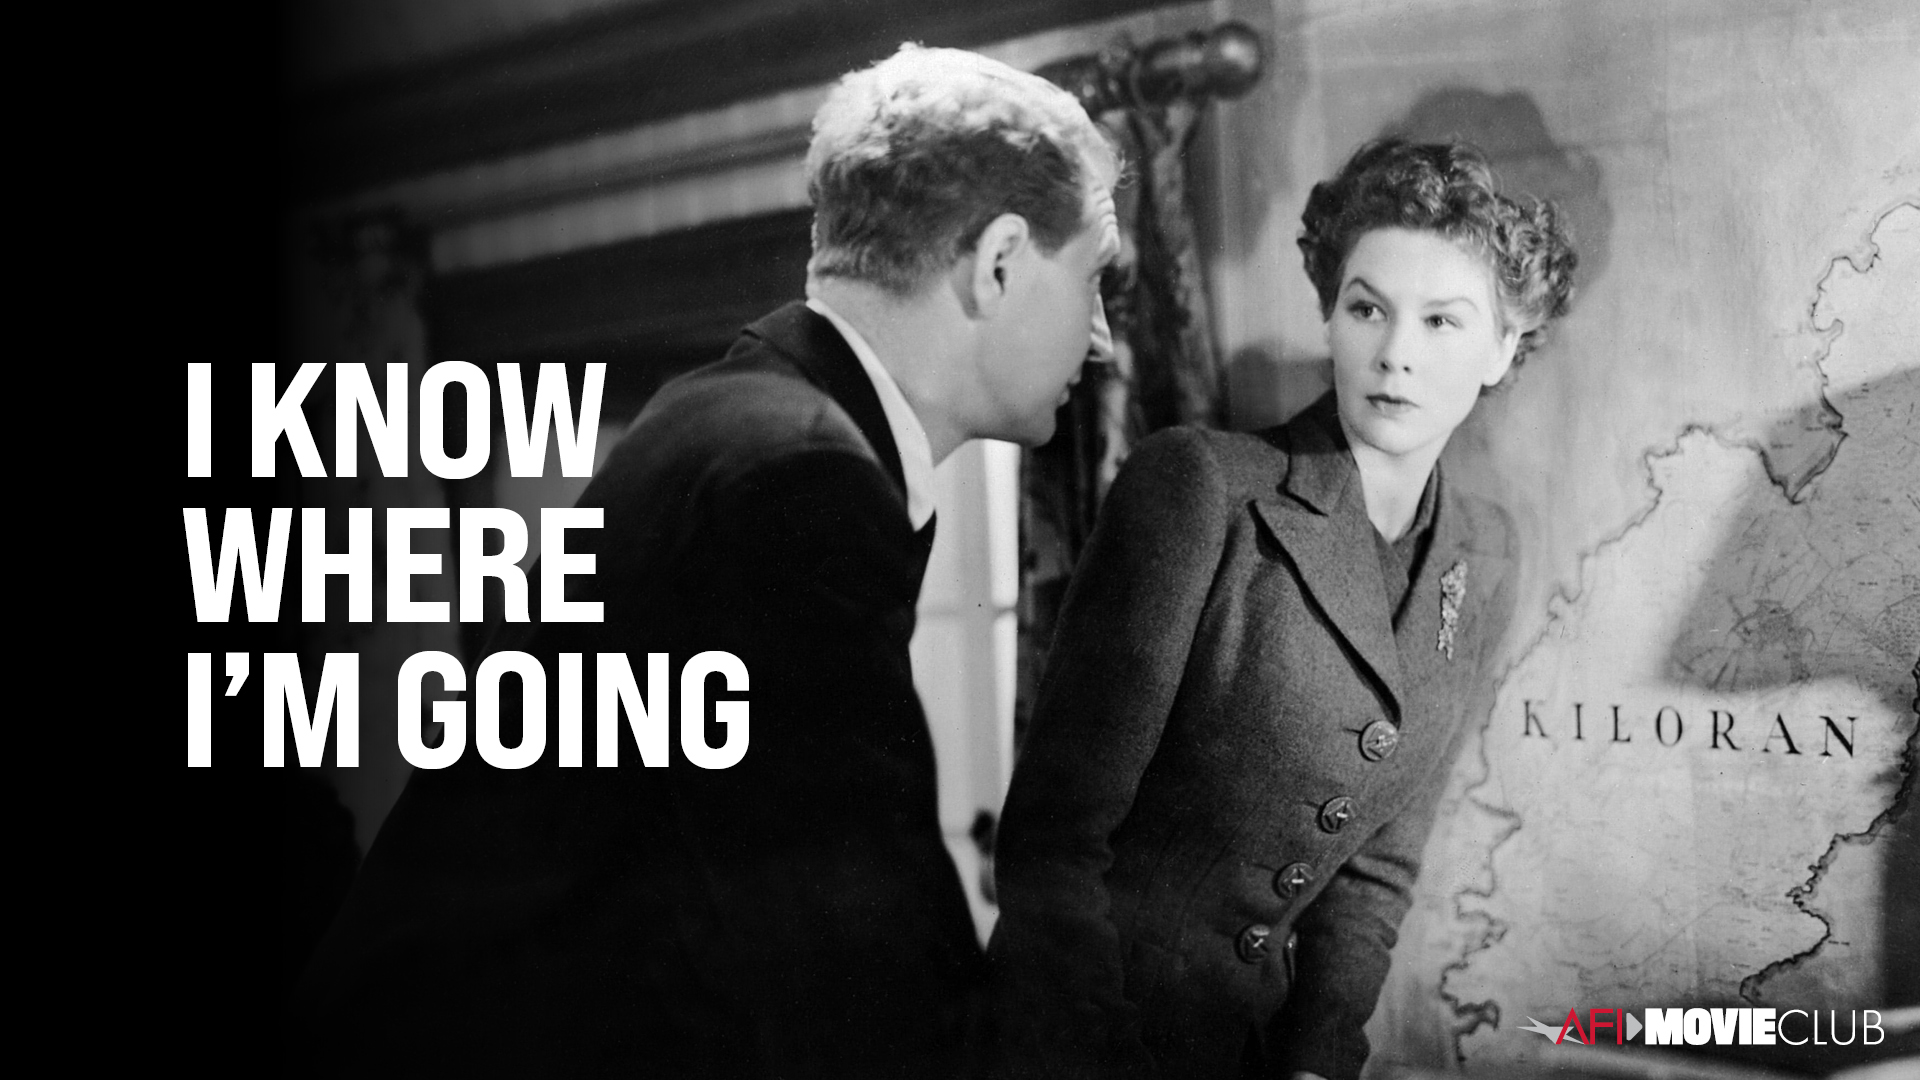 I KNOW WHERE I’M GOING Film Still - Wendy Hiller and Roger Livesey